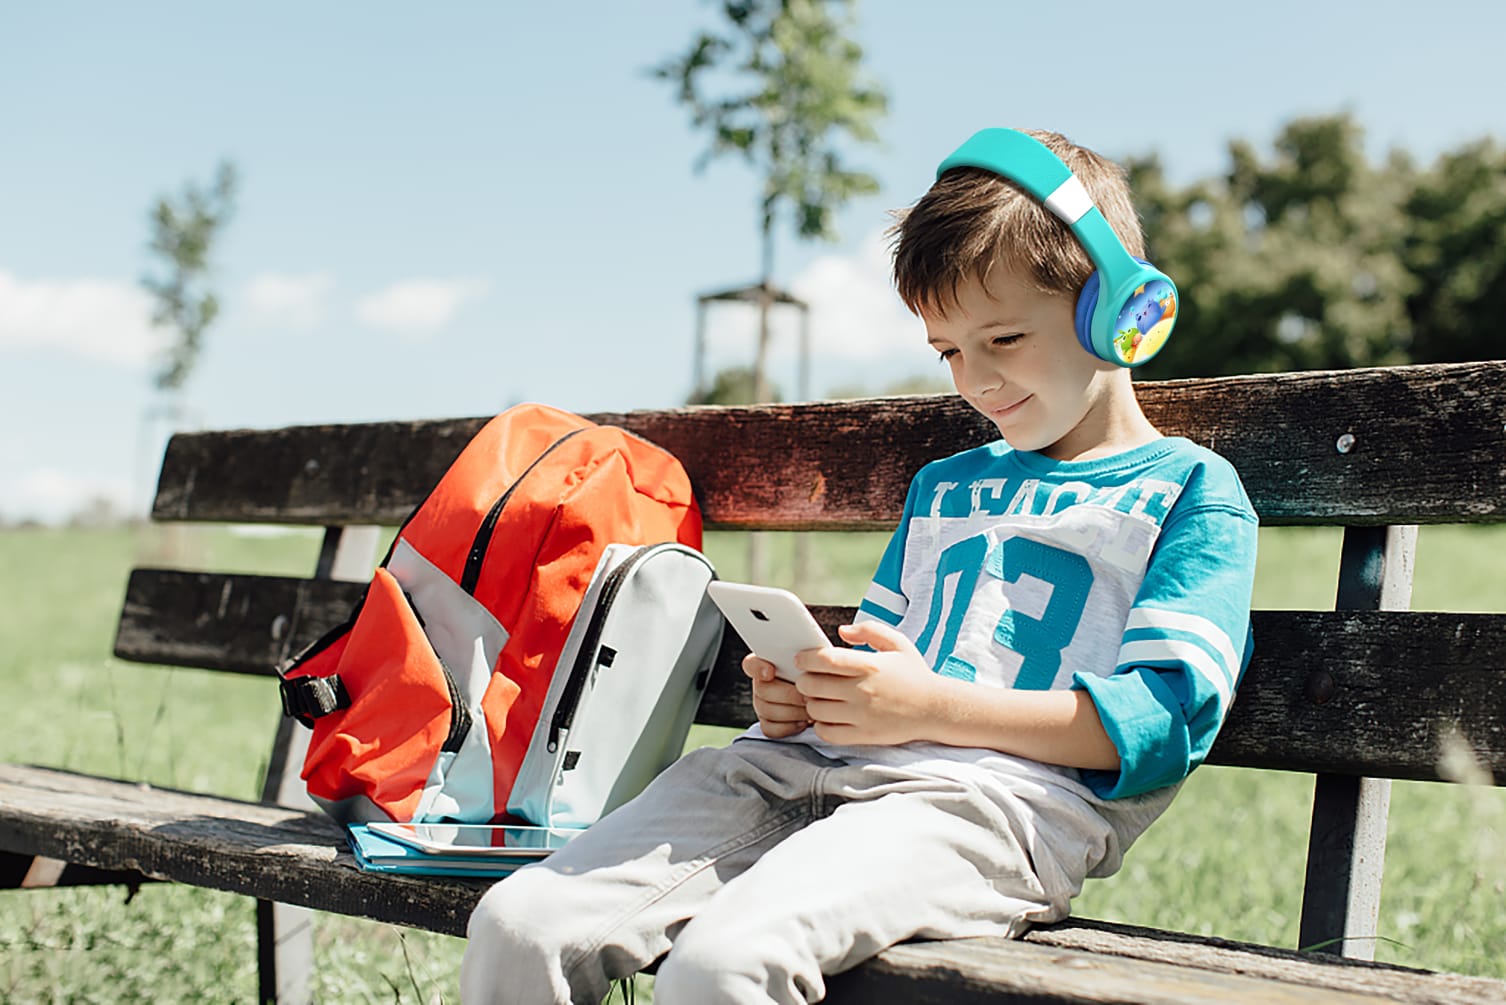 e-PitchPerfect (e-PP) 67M Kids Wireless Headphones with Microphone On-Ear Comfortable 90° swiveling Protein Earpads Designed and Engineered in the USA Sold 5,000+ worldwide